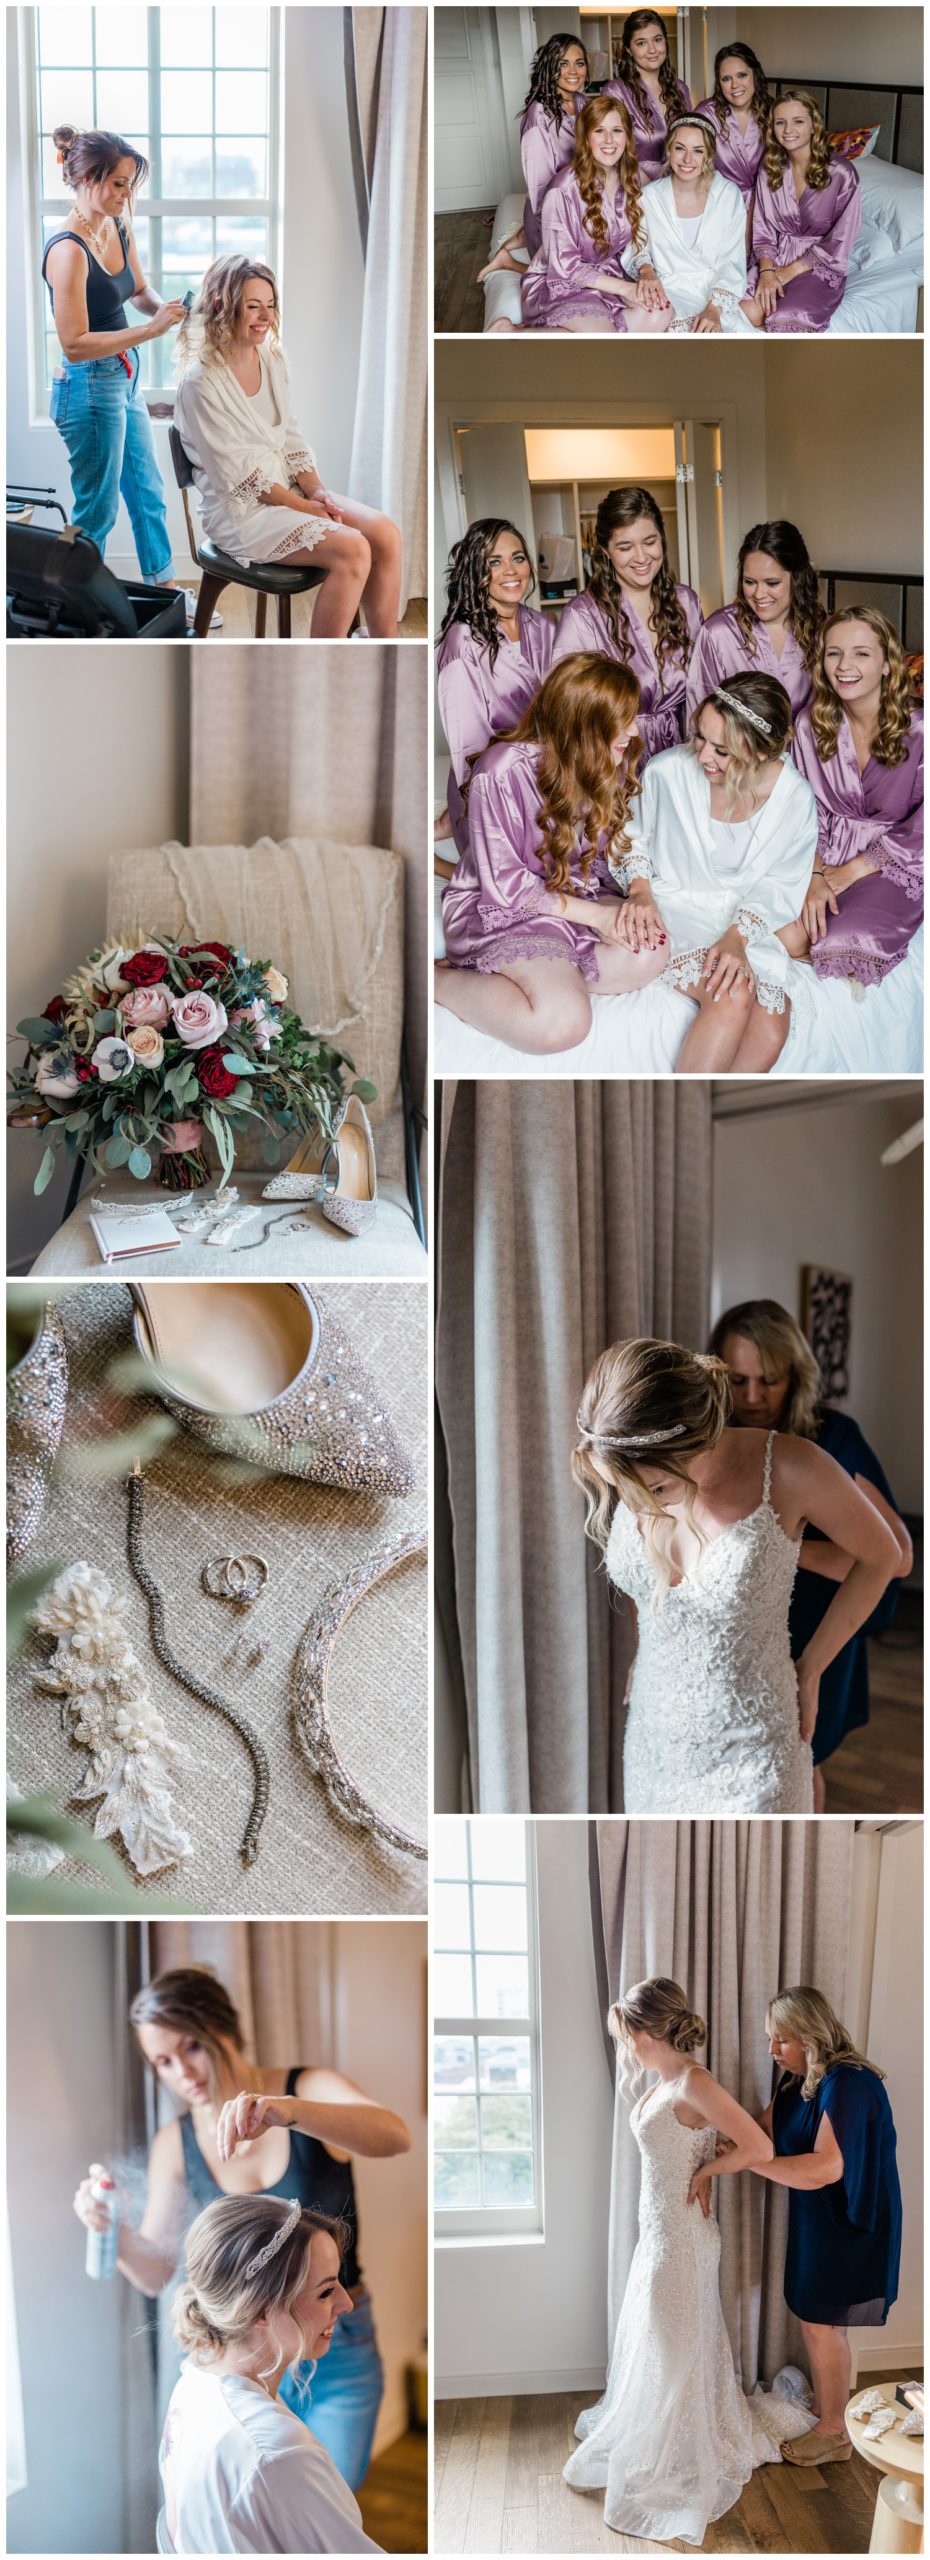 Getting ready photos - apt b photography - flowers by ivory and beau - makeup and hair by royal makeup and hair